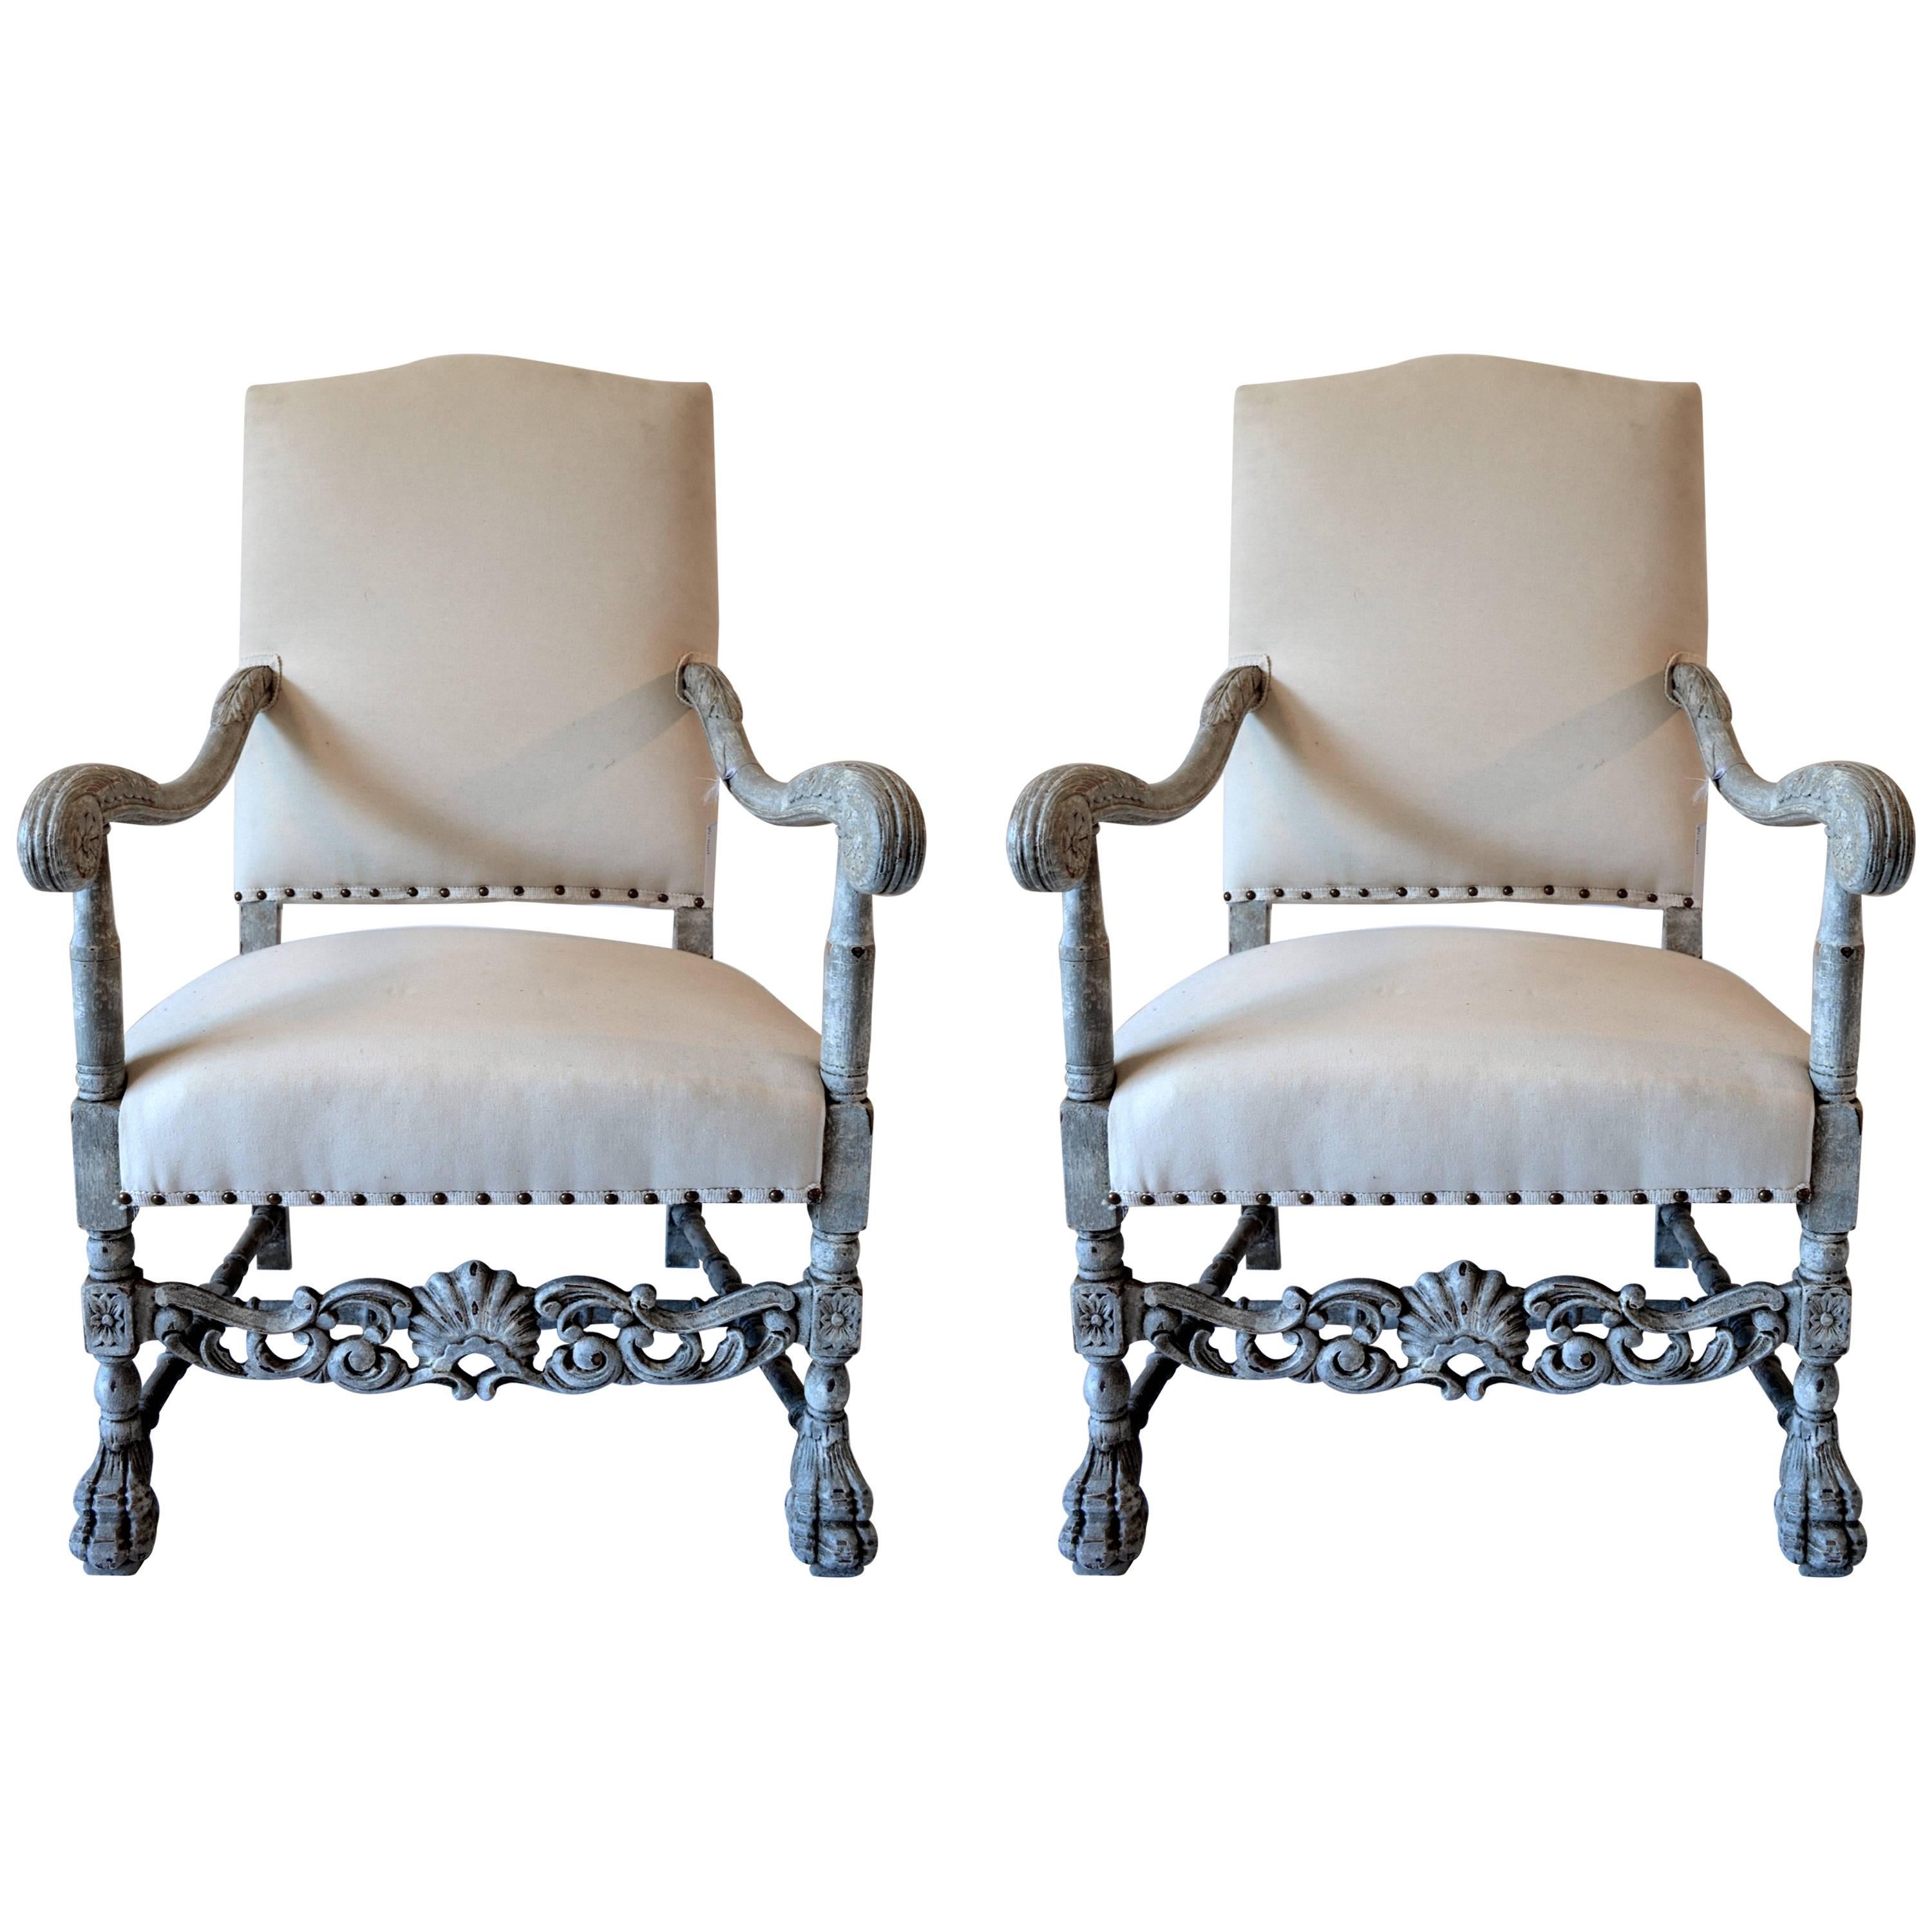 Pair of Chateau Chairs For Sale